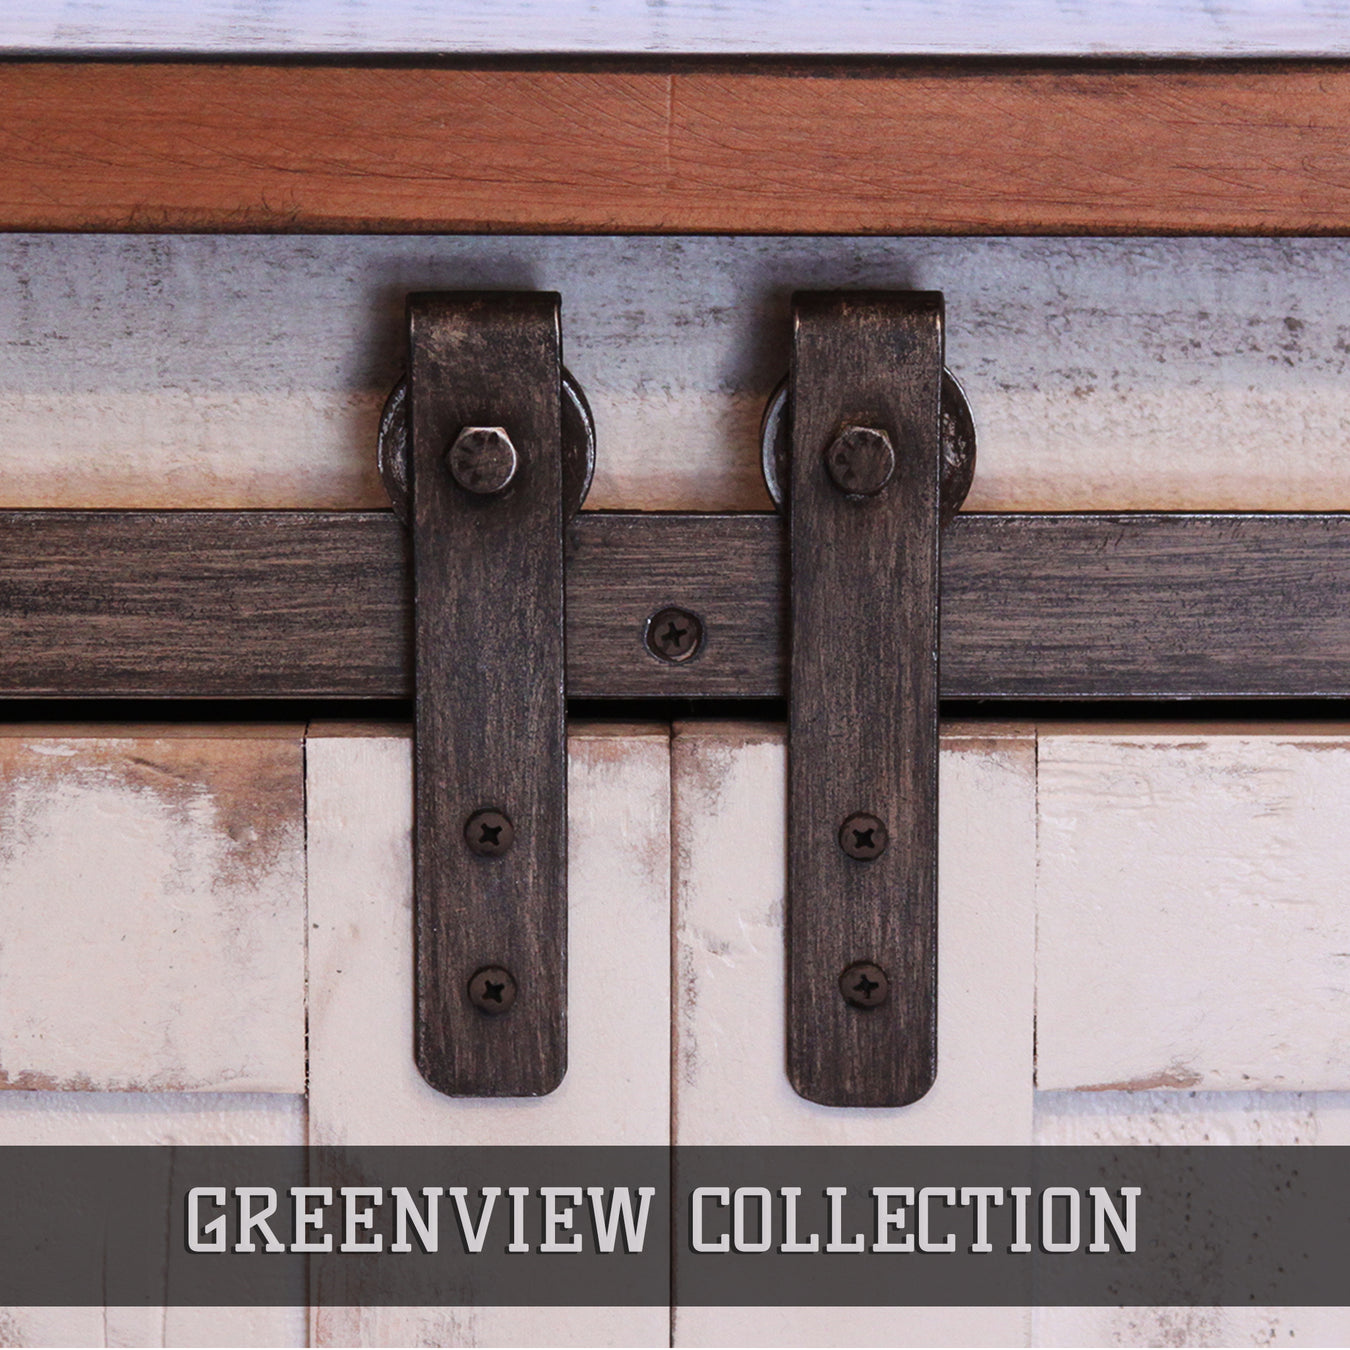 Greenview Collection